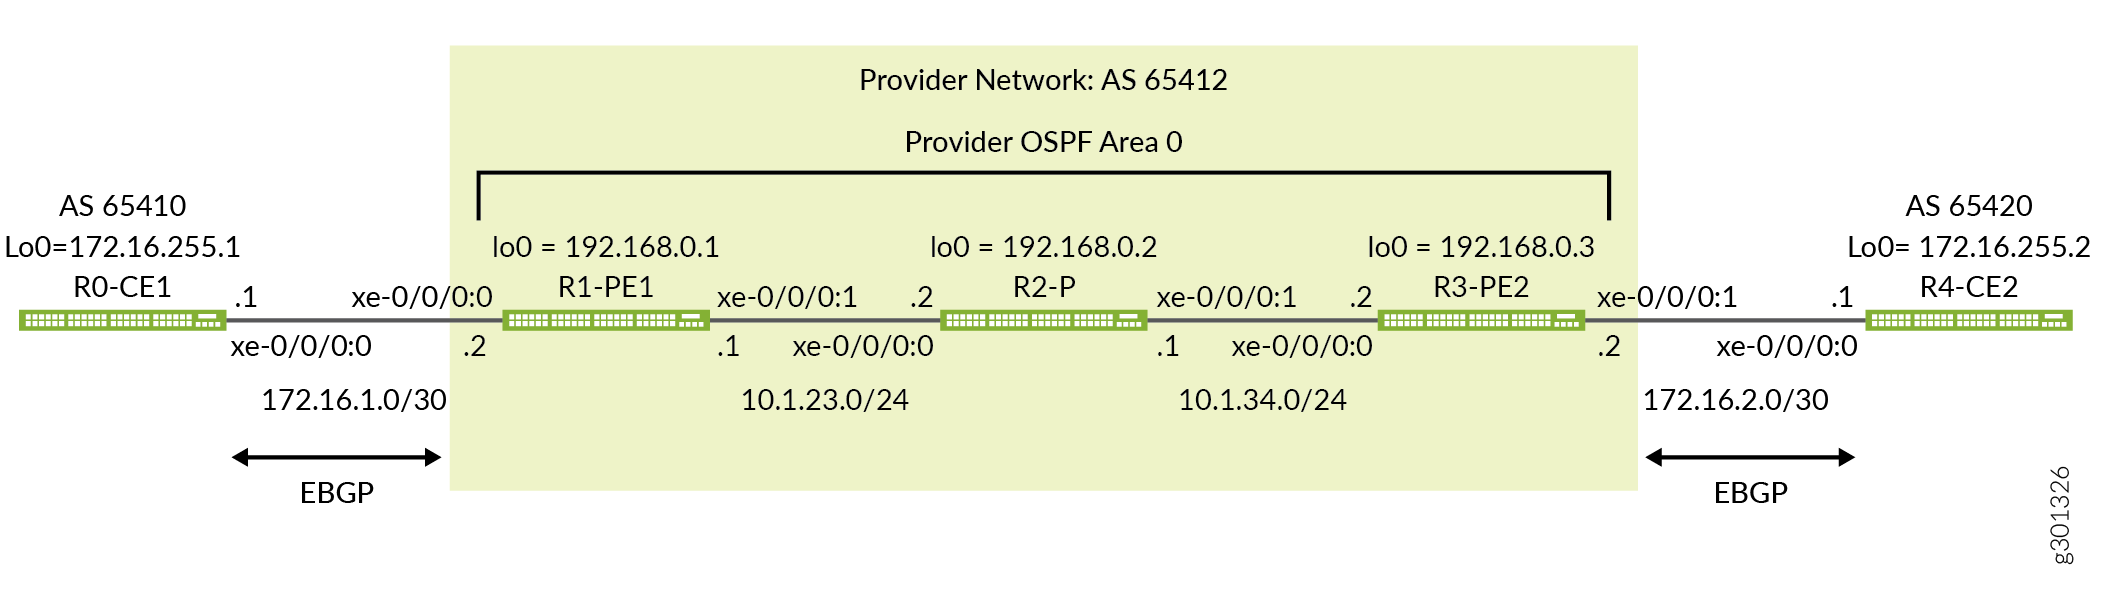 An MPLS-Based Layer 3 VPN with EBGP as the PE-CE Routing Protocol